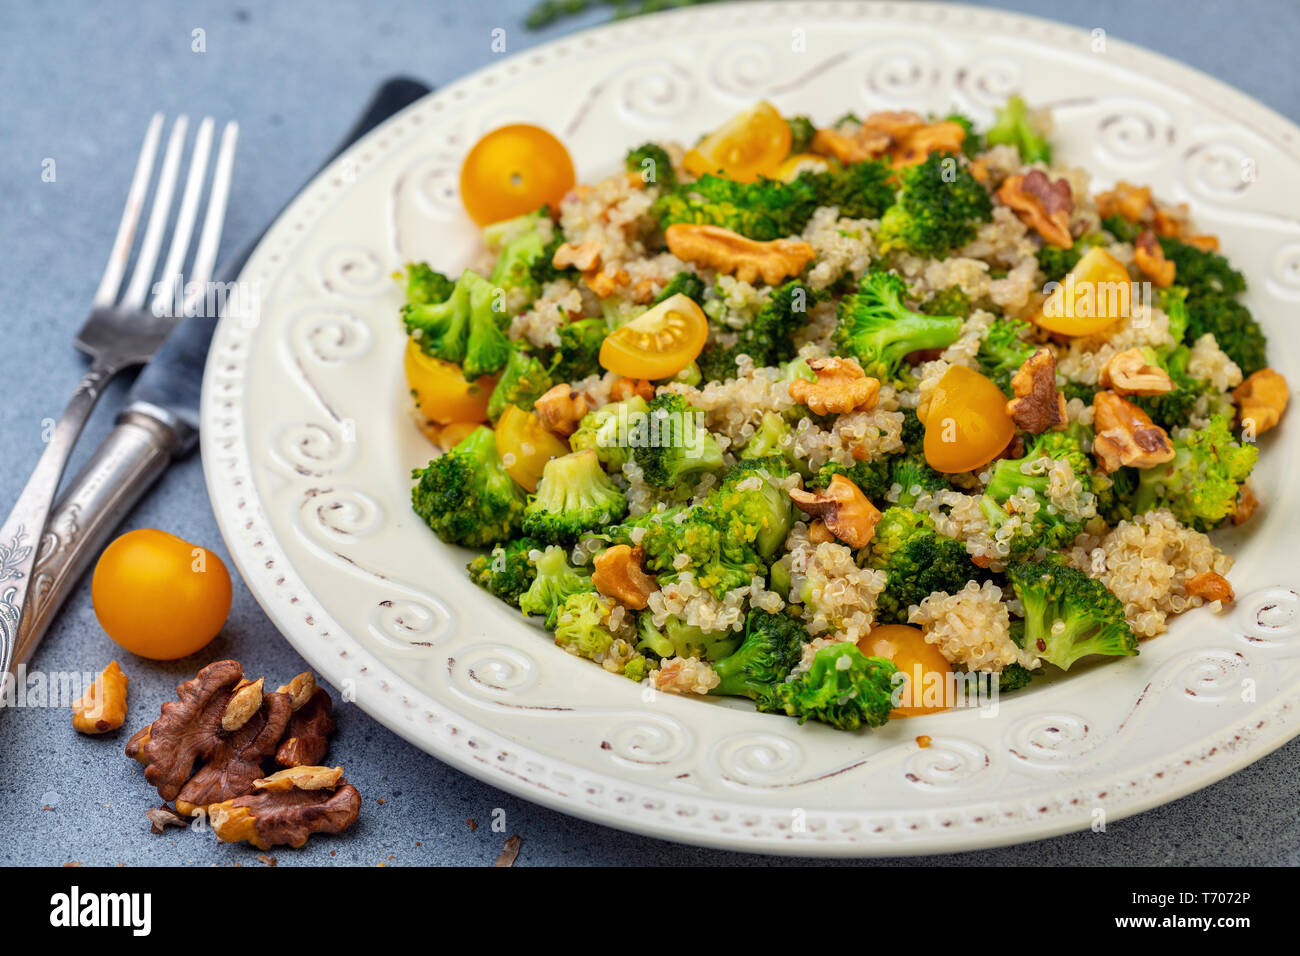 Warm broccoli salad and a movie for a healthy diet. Stock Photo